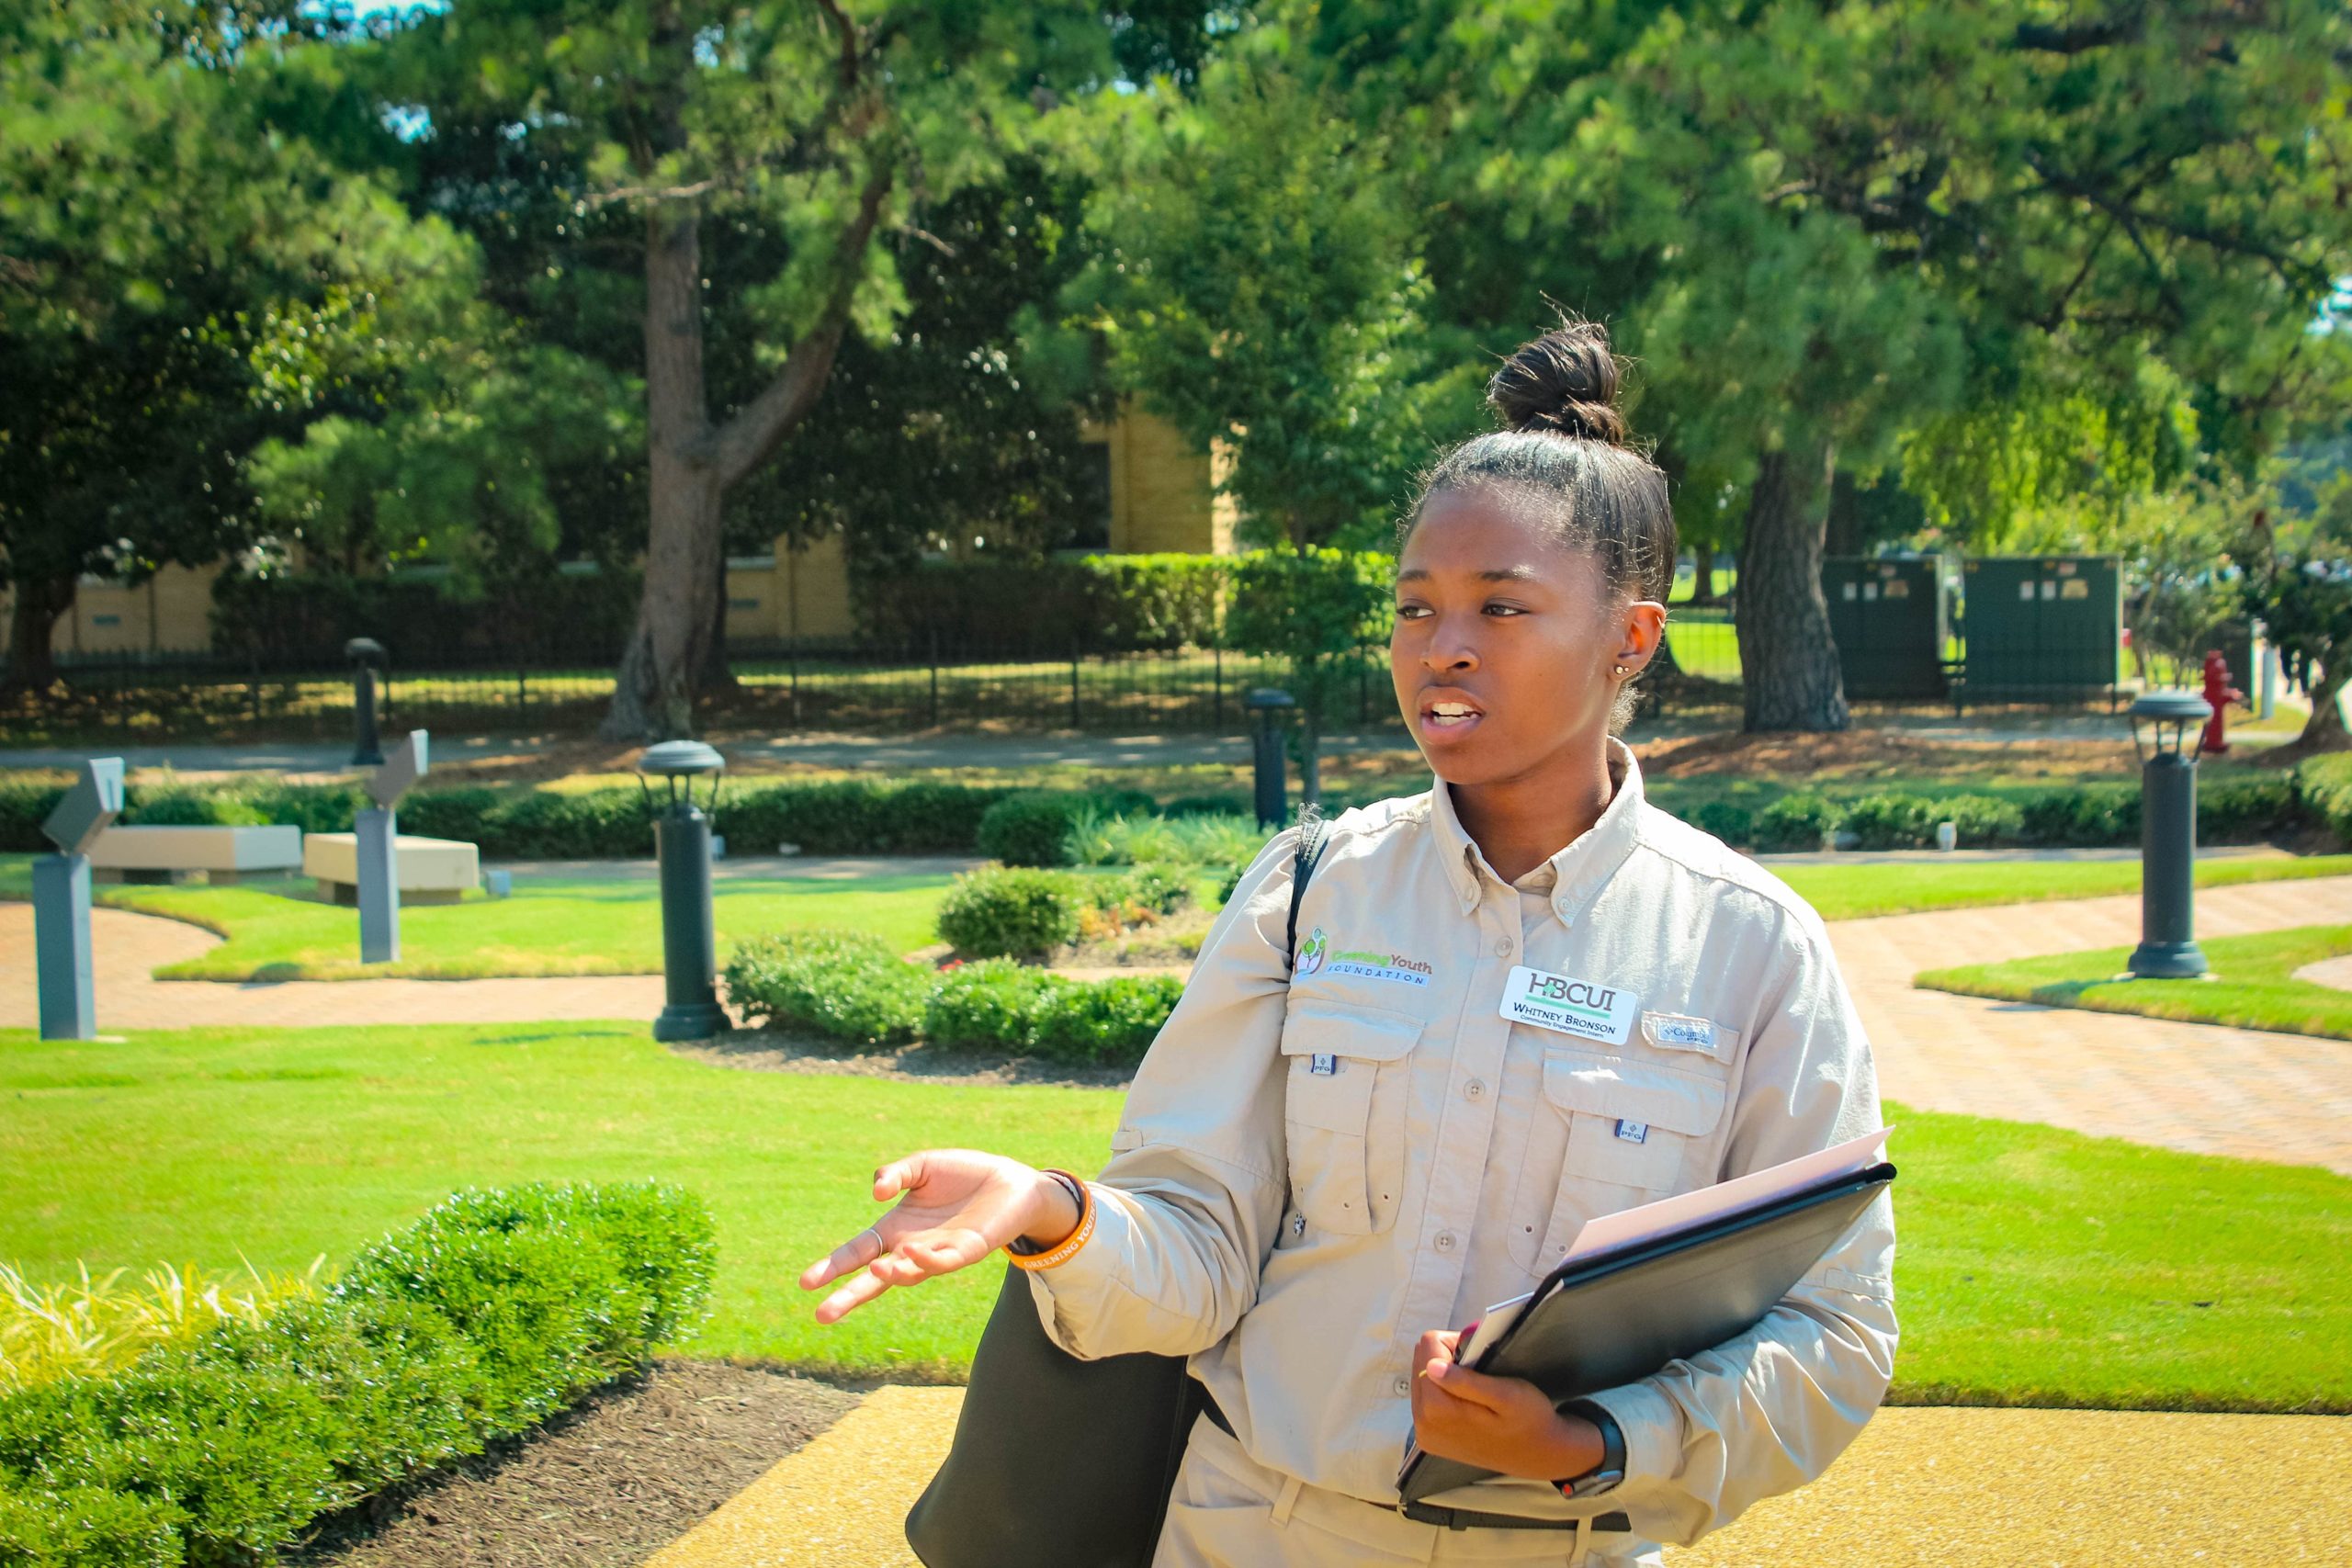 A GYF intern holds a clipboard in one hand and extends her other hand out. She stands in a sunny, manicured grassy park.